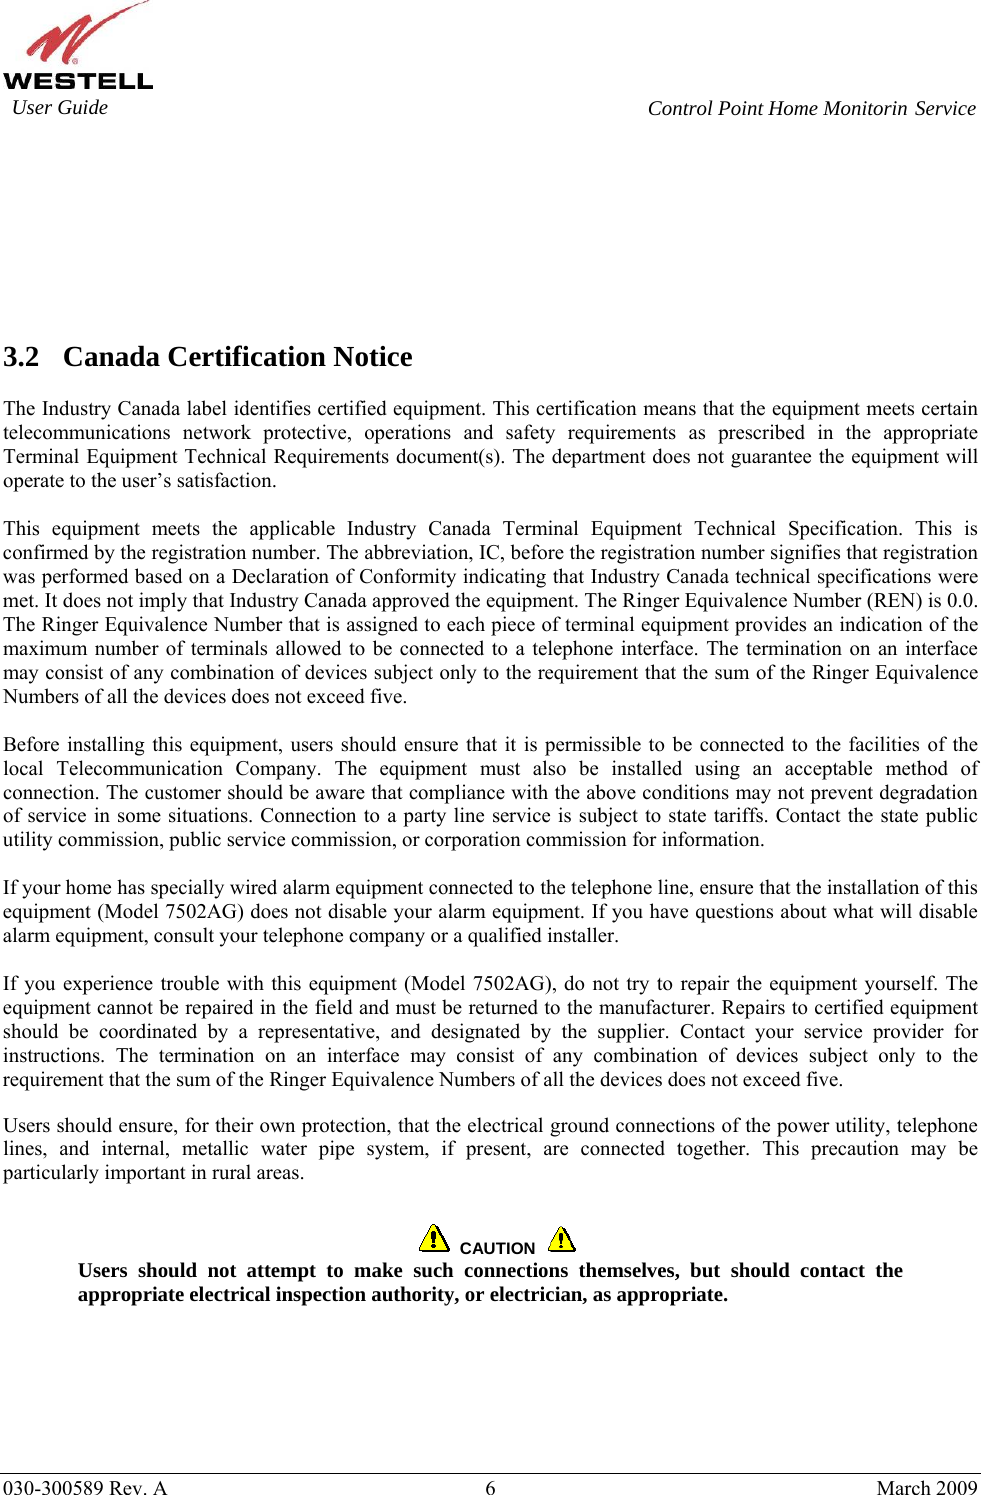    030-300589 Rev. A  6  March 2009  Service         3.2 Canada Certification Notice  The Industry Canada label identifies certified equipment. This certification means that the equipment meets certain telecommunications network protective, operations and safety requirements as prescribed in the appropriate Terminal Equipment Technical Requirements document(s). The department does not guarantee the equipment will operate to the user’s satisfaction.  This equipment meets the applicable Industry Canada Terminal Equipment Technical Specification. This is confirmed by the registration number. The abbreviation, IC, before the registration number signifies that registration was performed based on a Declaration of Conformity indicating that Industry Canada technical specifications were met. It does not imply that Industry Canada approved the equipment. The Ringer Equivalence Number (REN) is 0.0. The Ringer Equivalence Number that is assigned to each piece of terminal equipment provides an indication of the maximum number of terminals allowed to be connected to a telephone interface. The termination on an interface may consist of any combination of devices subject only to the requirement that the sum of the Ringer Equivalence Numbers of all the devices does not exceed five.  Before installing this equipment, users should ensure that it is permissible to be connected to the facilities of the local Telecommunication Company. The equipment must also be installed using an acceptable method of connection. The customer should be aware that compliance with the above conditions may not prevent degradation of service in some situations. Connection to a party line service is subject to state tariffs. Contact the state public utility commission, public service commission, or corporation commission for information.  If your home has specially wired alarm equipment connected to the telephone line, ensure that the installation of this equipment (Model 7502AG) does not disable your alarm equipment. If you have questions about what will disable alarm equipment, consult your telephone company or a qualified installer.  If you experience trouble with this equipment (Model 7502AG), do not try to repair the equipment yourself. The equipment cannot be repaired in the field and must be returned to the manufacturer. Repairs to certified equipment should be coordinated by a representative, and designated by the supplier. Contact your service provider for instructions. The termination on an interface may consist of any combination of devices subject only to the requirement that the sum of the Ringer Equivalence Numbers of all the devices does not exceed five.  Users should ensure, for their own protection, that the electrical ground connections of the power utility, telephone lines, and internal, metallic water pipe system, if present, are connected together. This precaution may be particularly important in rural areas.      CAUTION  Users should not attempt to make such connections themselves, but should contact the appropriate electrical inspection authority, or electrician, as appropriate.  User Guide  Control Point Home Monitorin